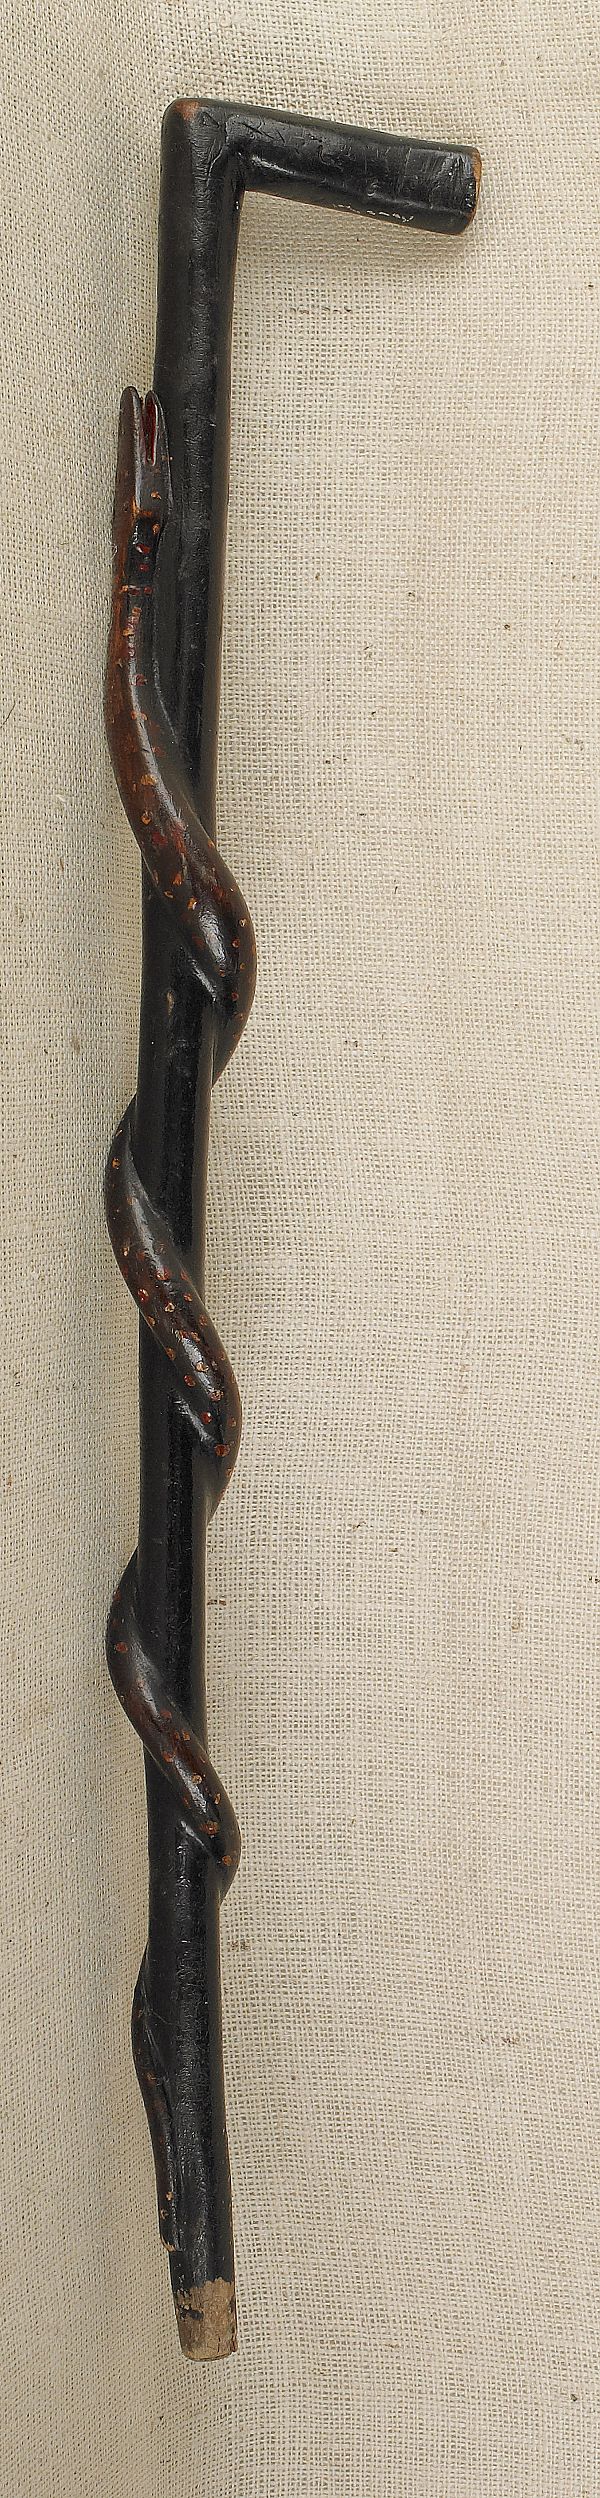 Carved and painted cane with a 175f7f